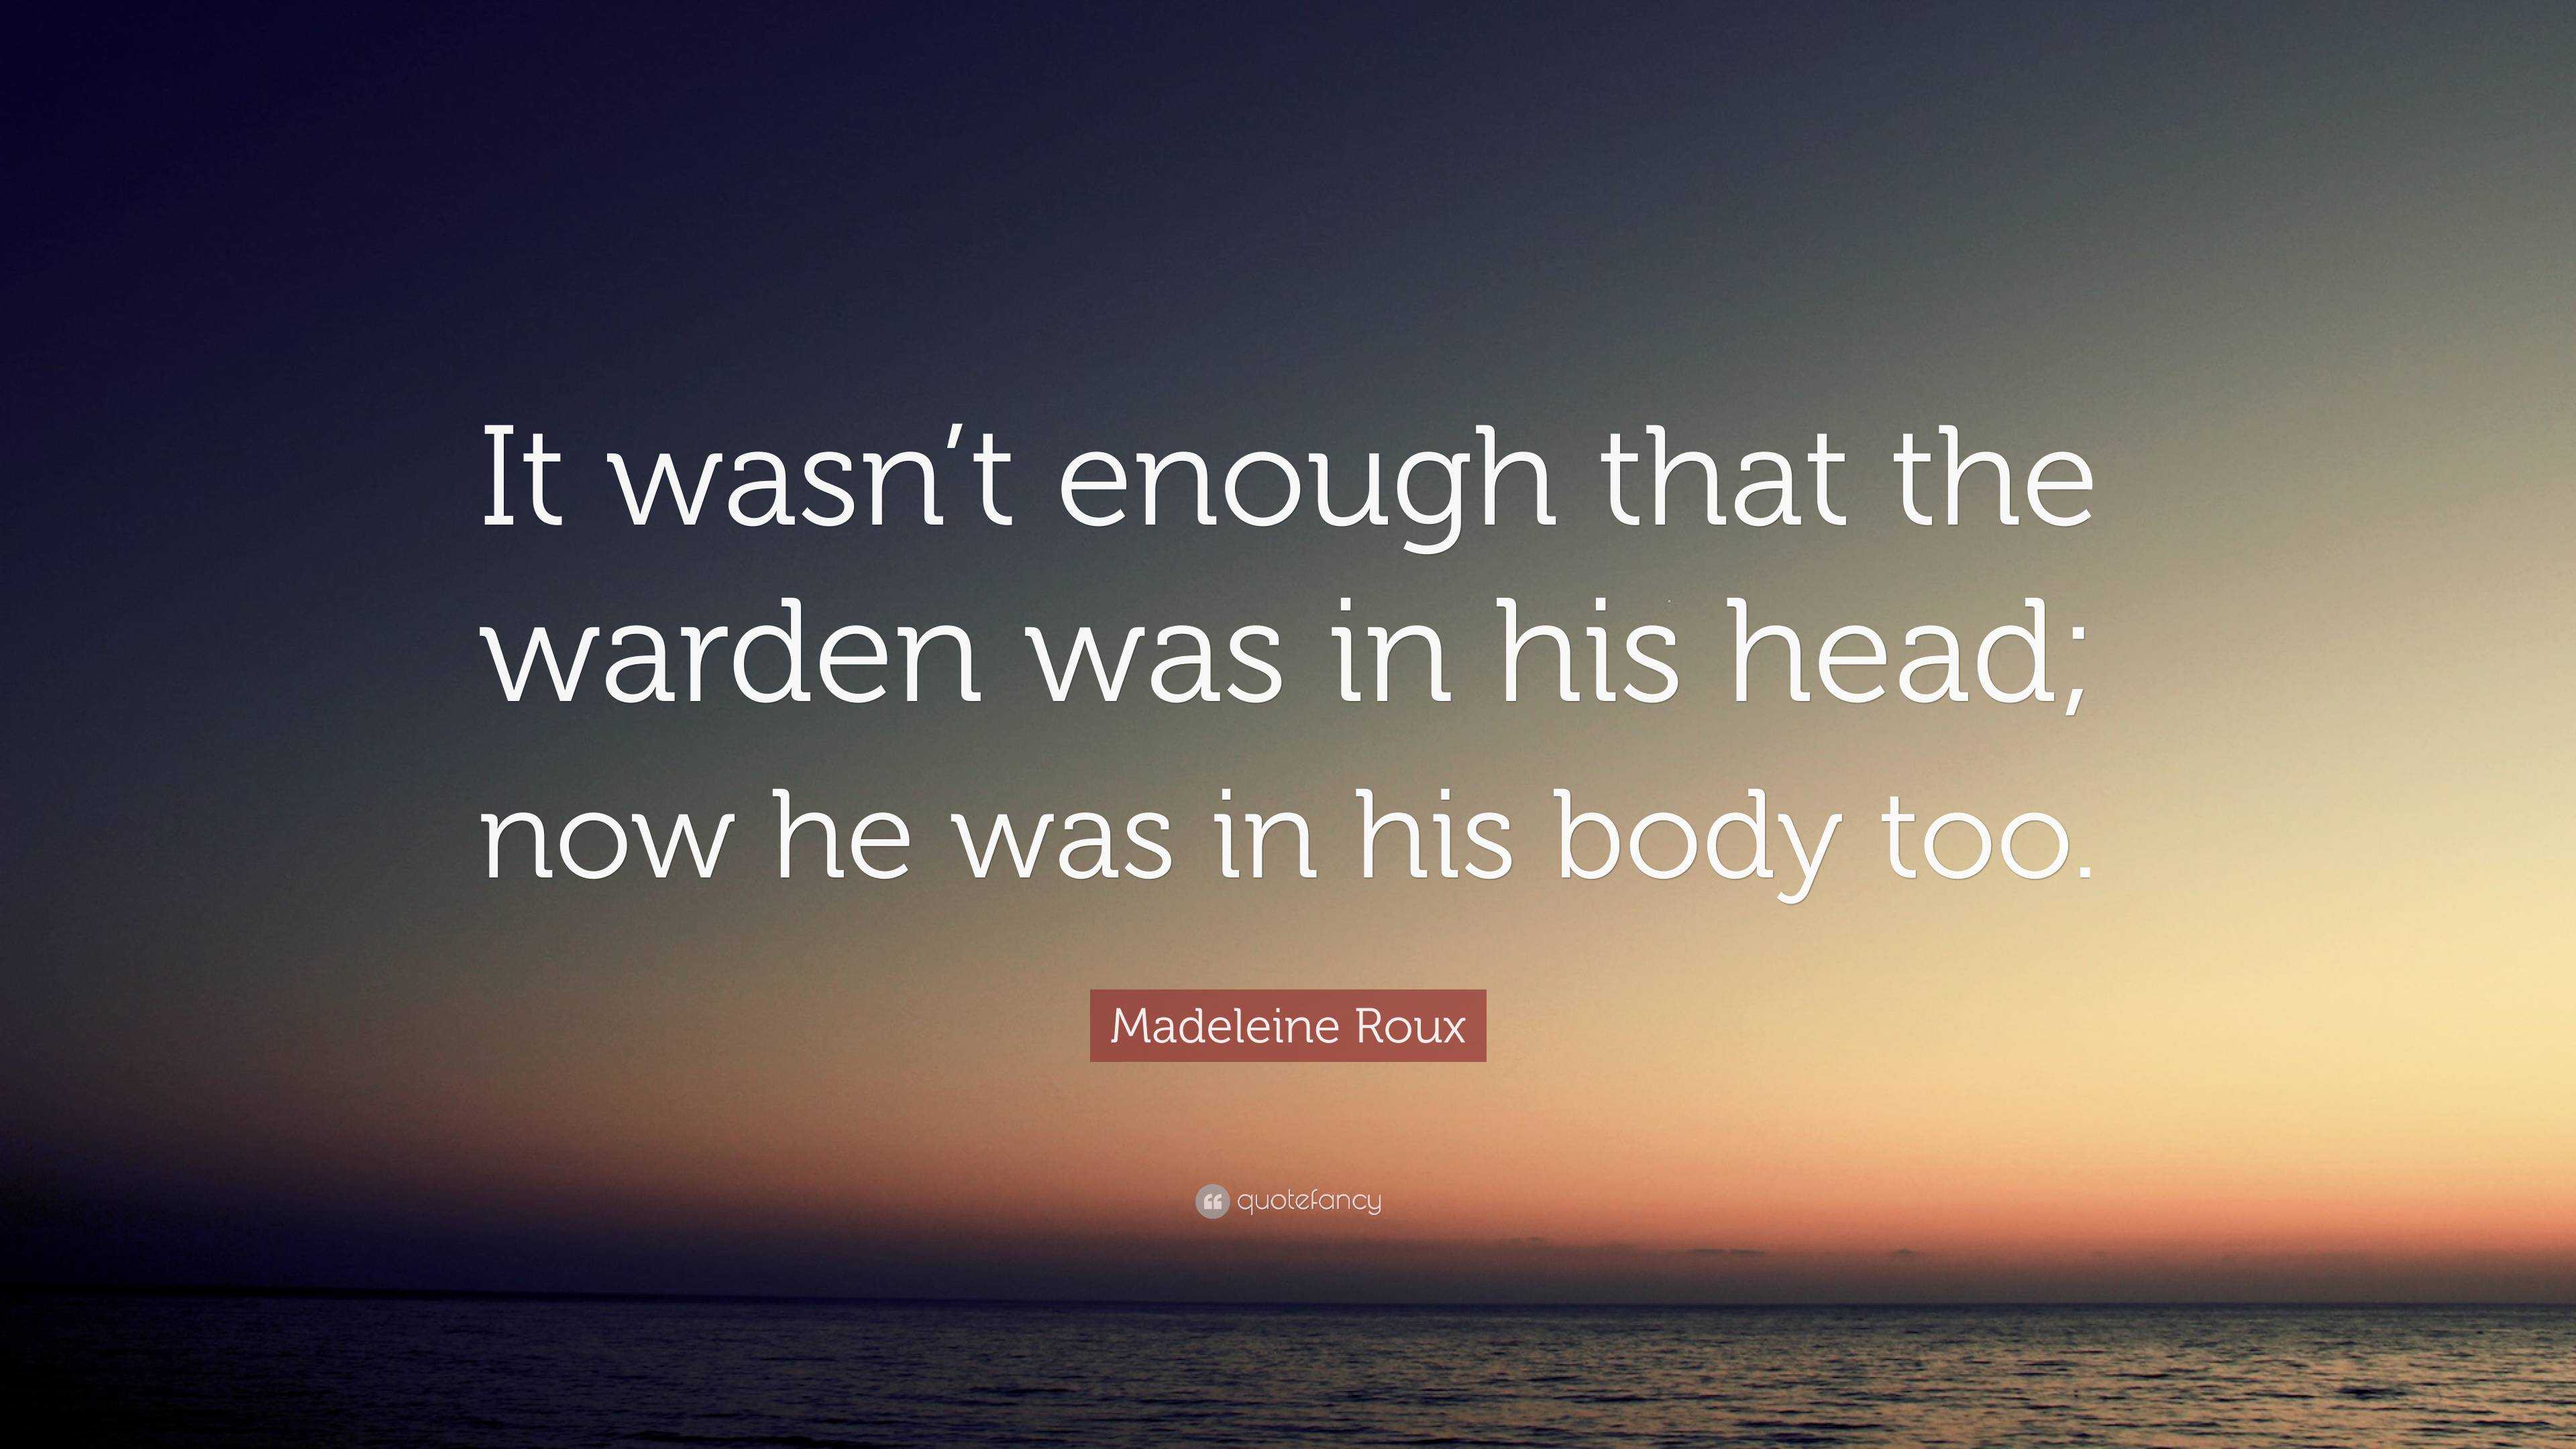 Madeleine Roux Quote: “It wasn’t enough that the warden was in his head ...